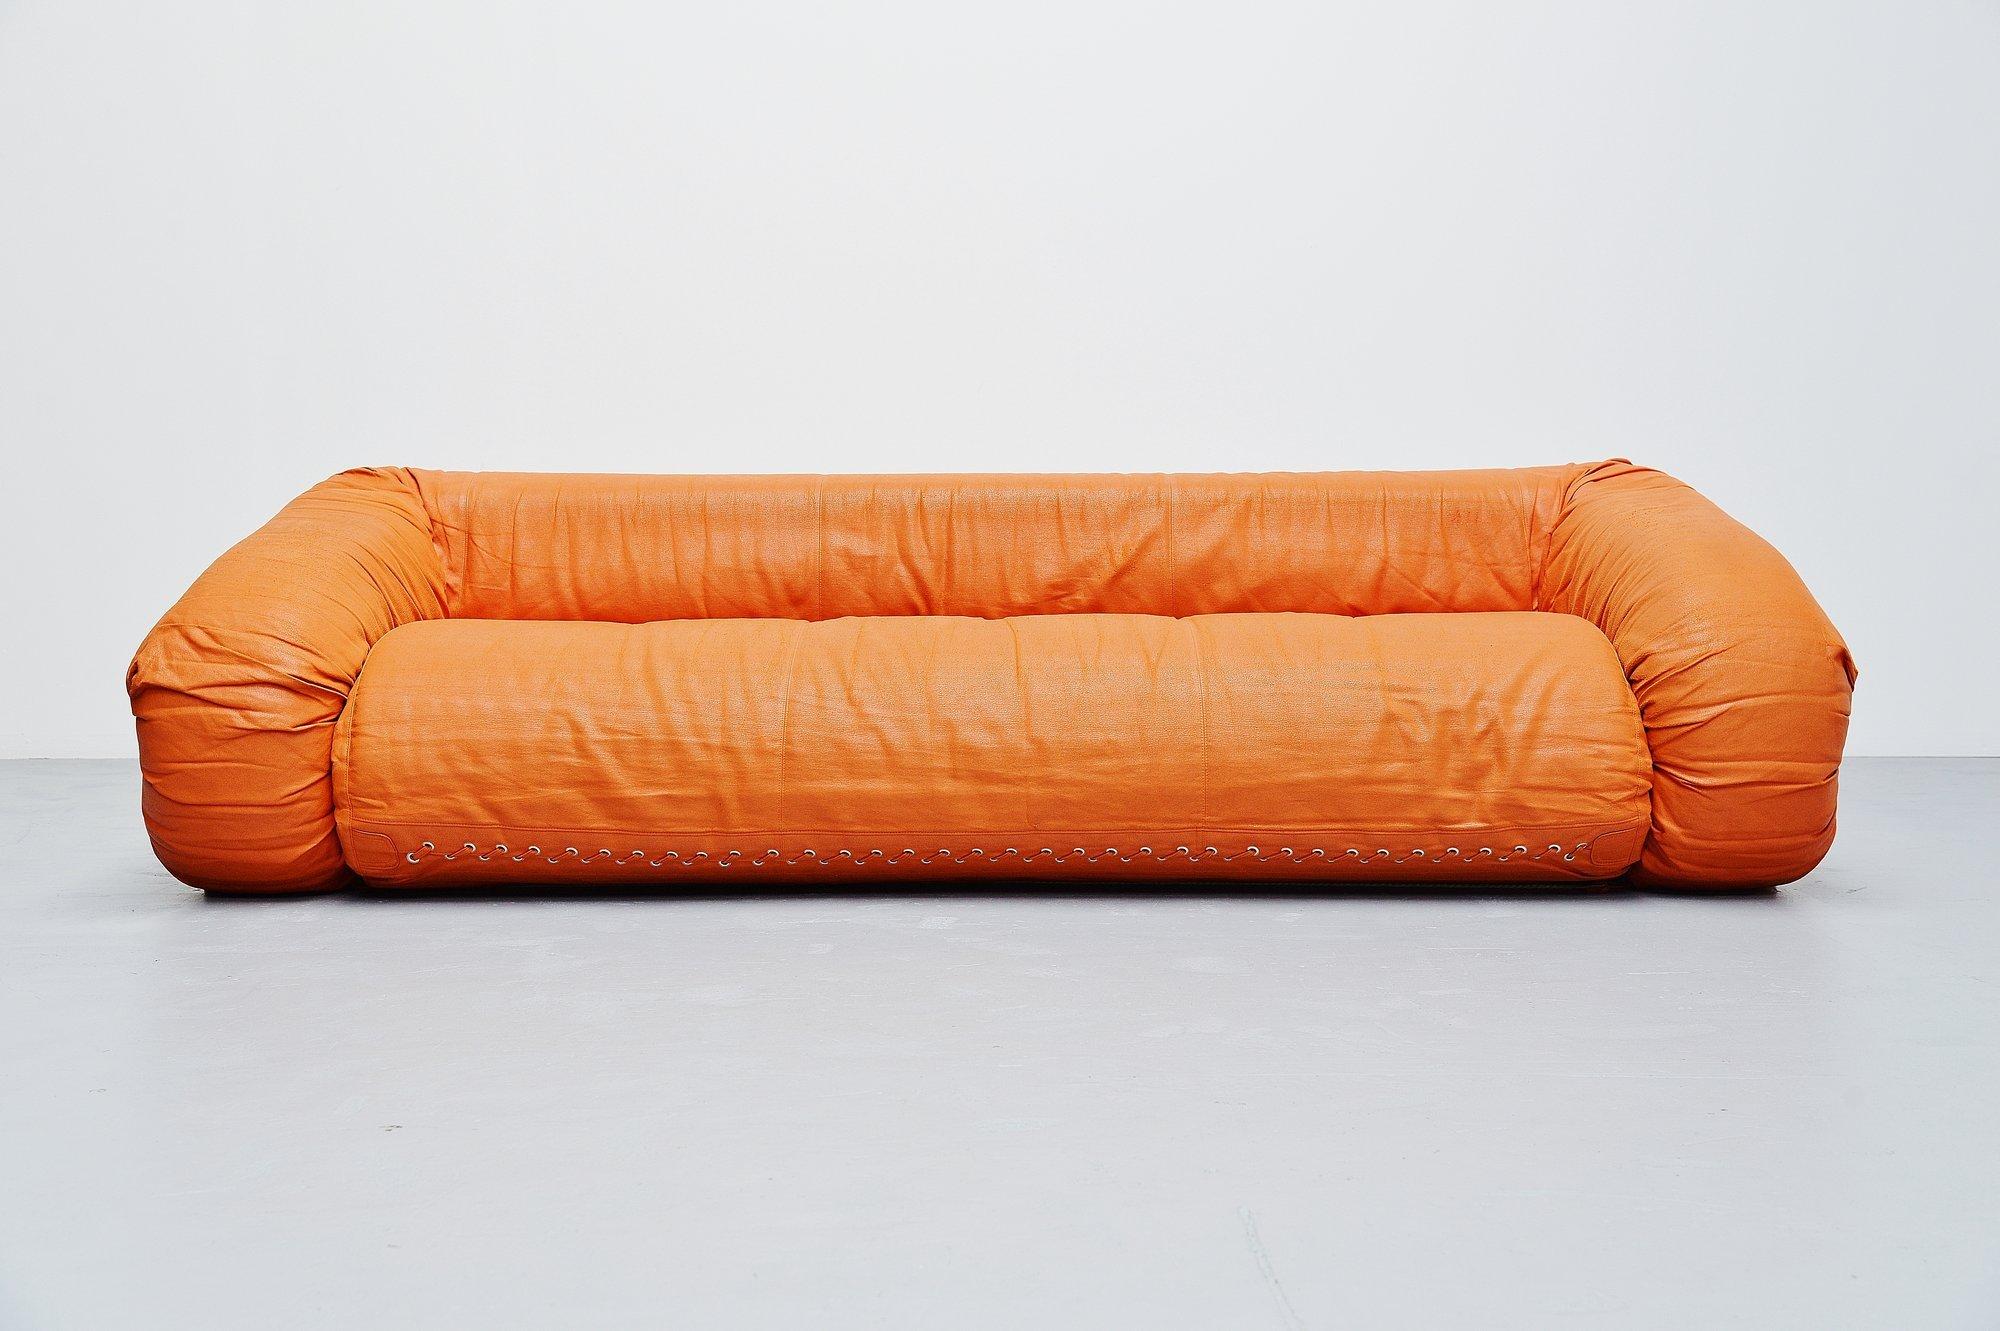 Very nice multi functional 'Anfibio' bed sofa designed by Alessandro Becchi and manufactured by Giovanetti, Italy 1971. This sofa is in orange faux leather and seats super comfortable. The sofa can be easily turned into a bed or play mattress for